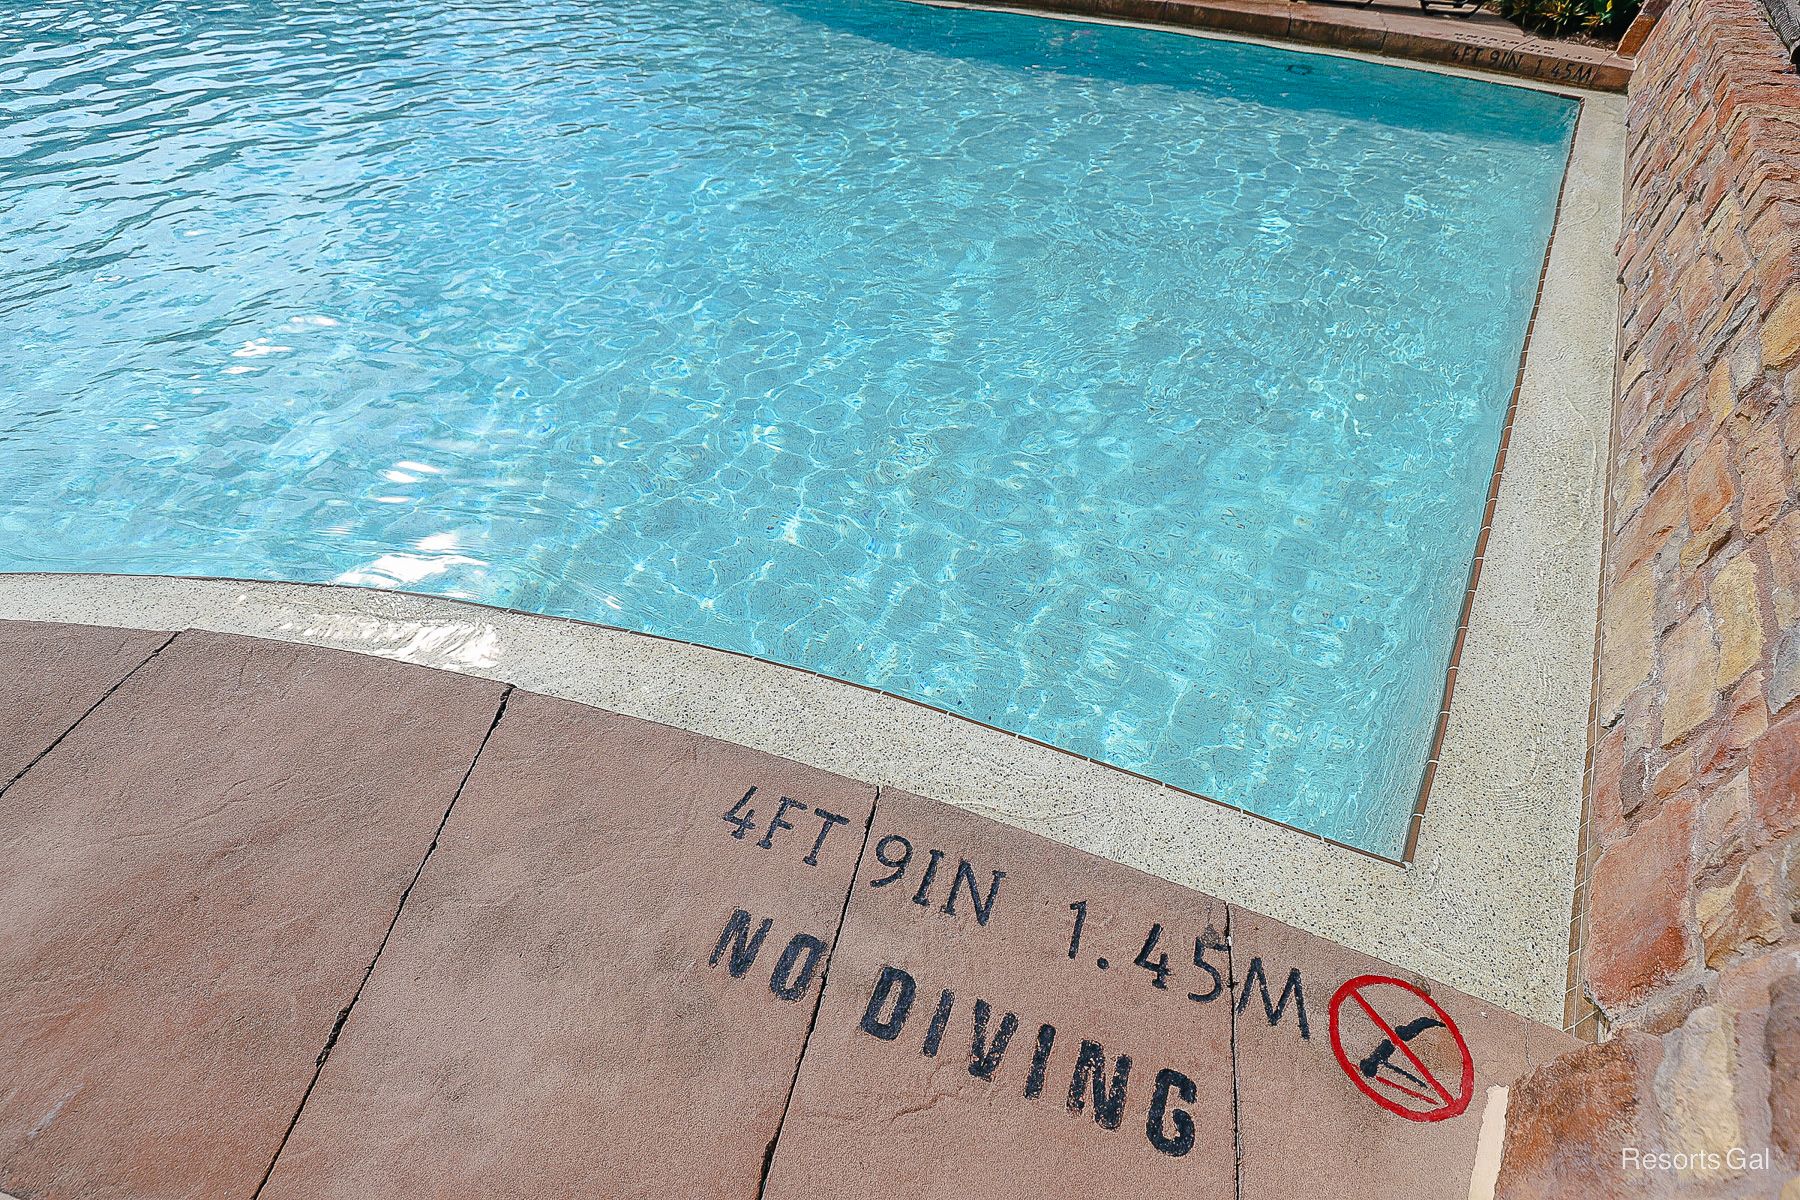 the pool depth is printed on the concrete and it says no diving 